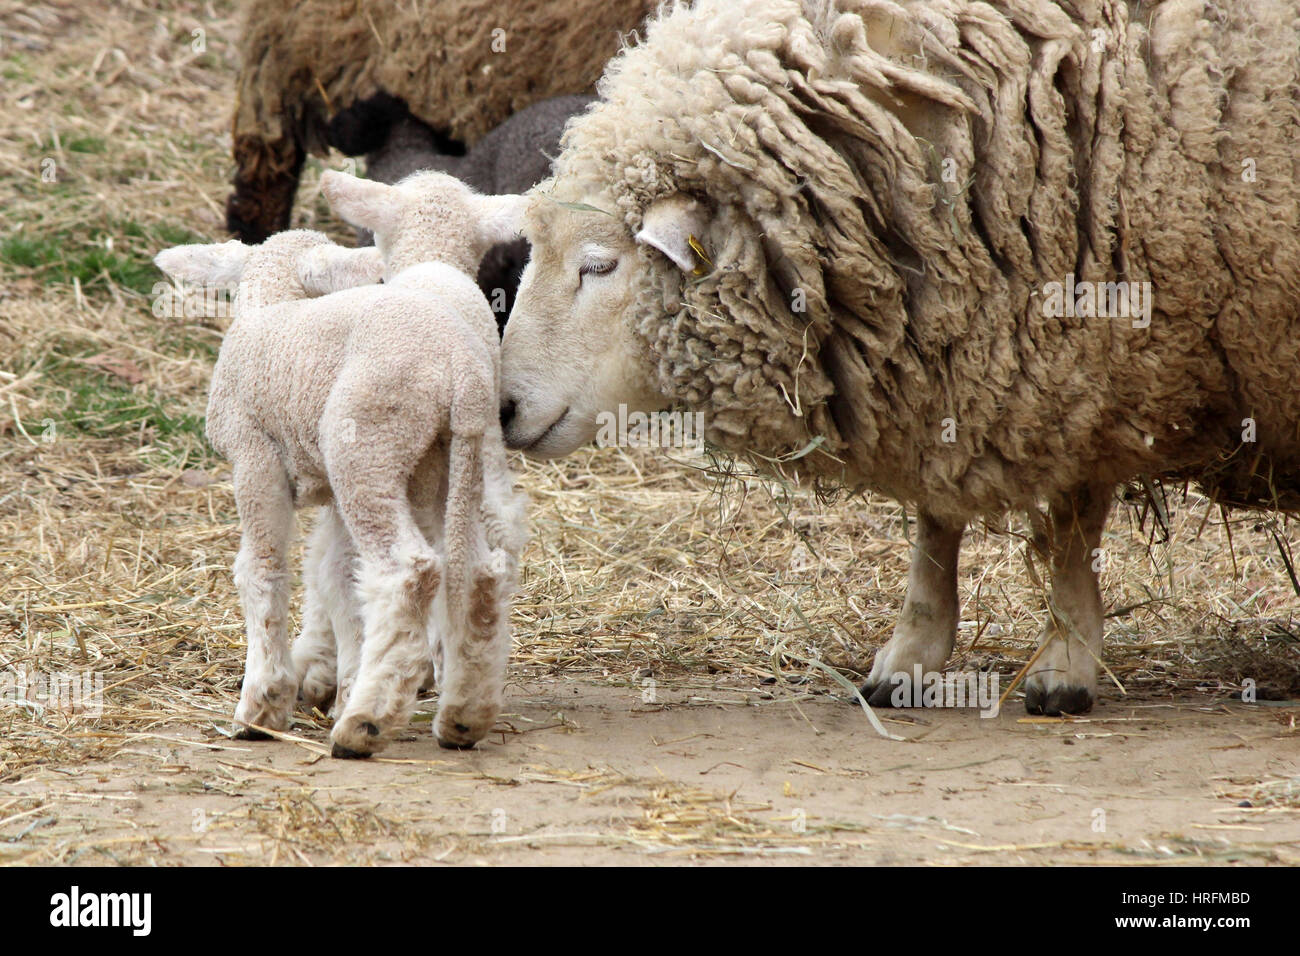 A mother sheep with her twin baby lambs in a pasture on a farm Stock Photo